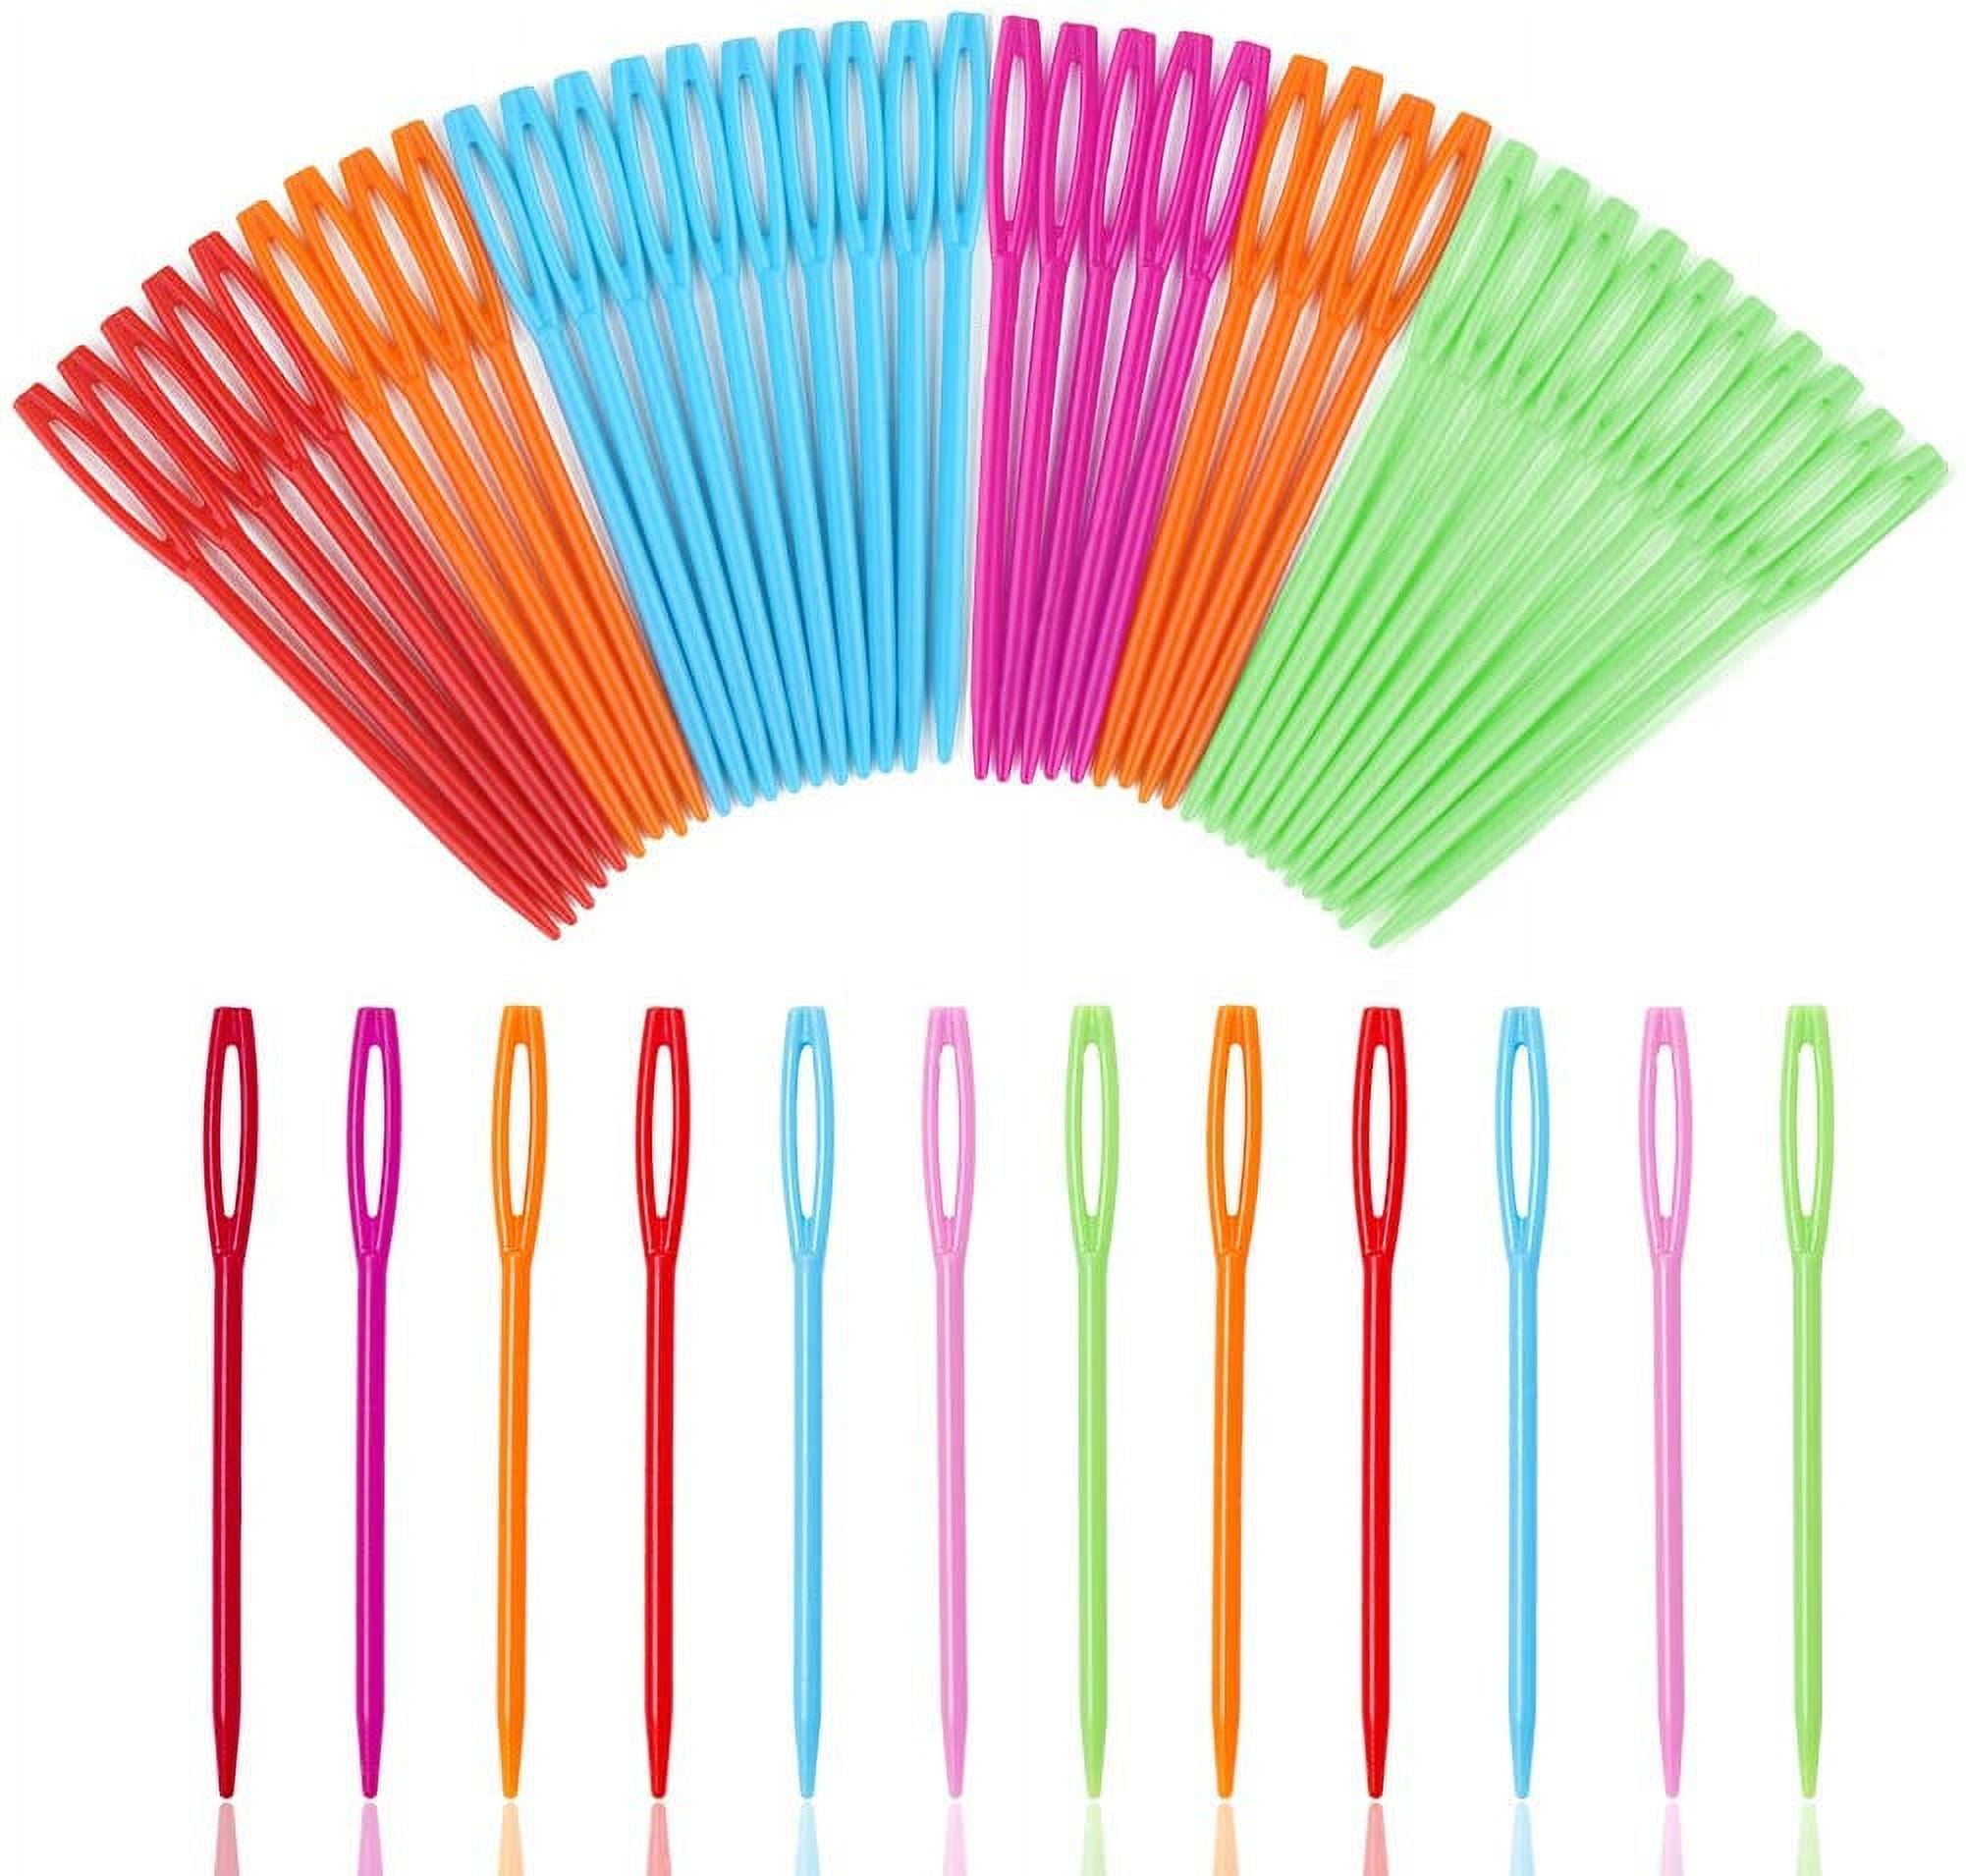 30 Pieces Colorful Plastic Sewing Needles, 9cm Length, Large Eye 6mm, Blunt Needles, Learning Needles, Plastic Yarn Needles, Safety Lacing Needles